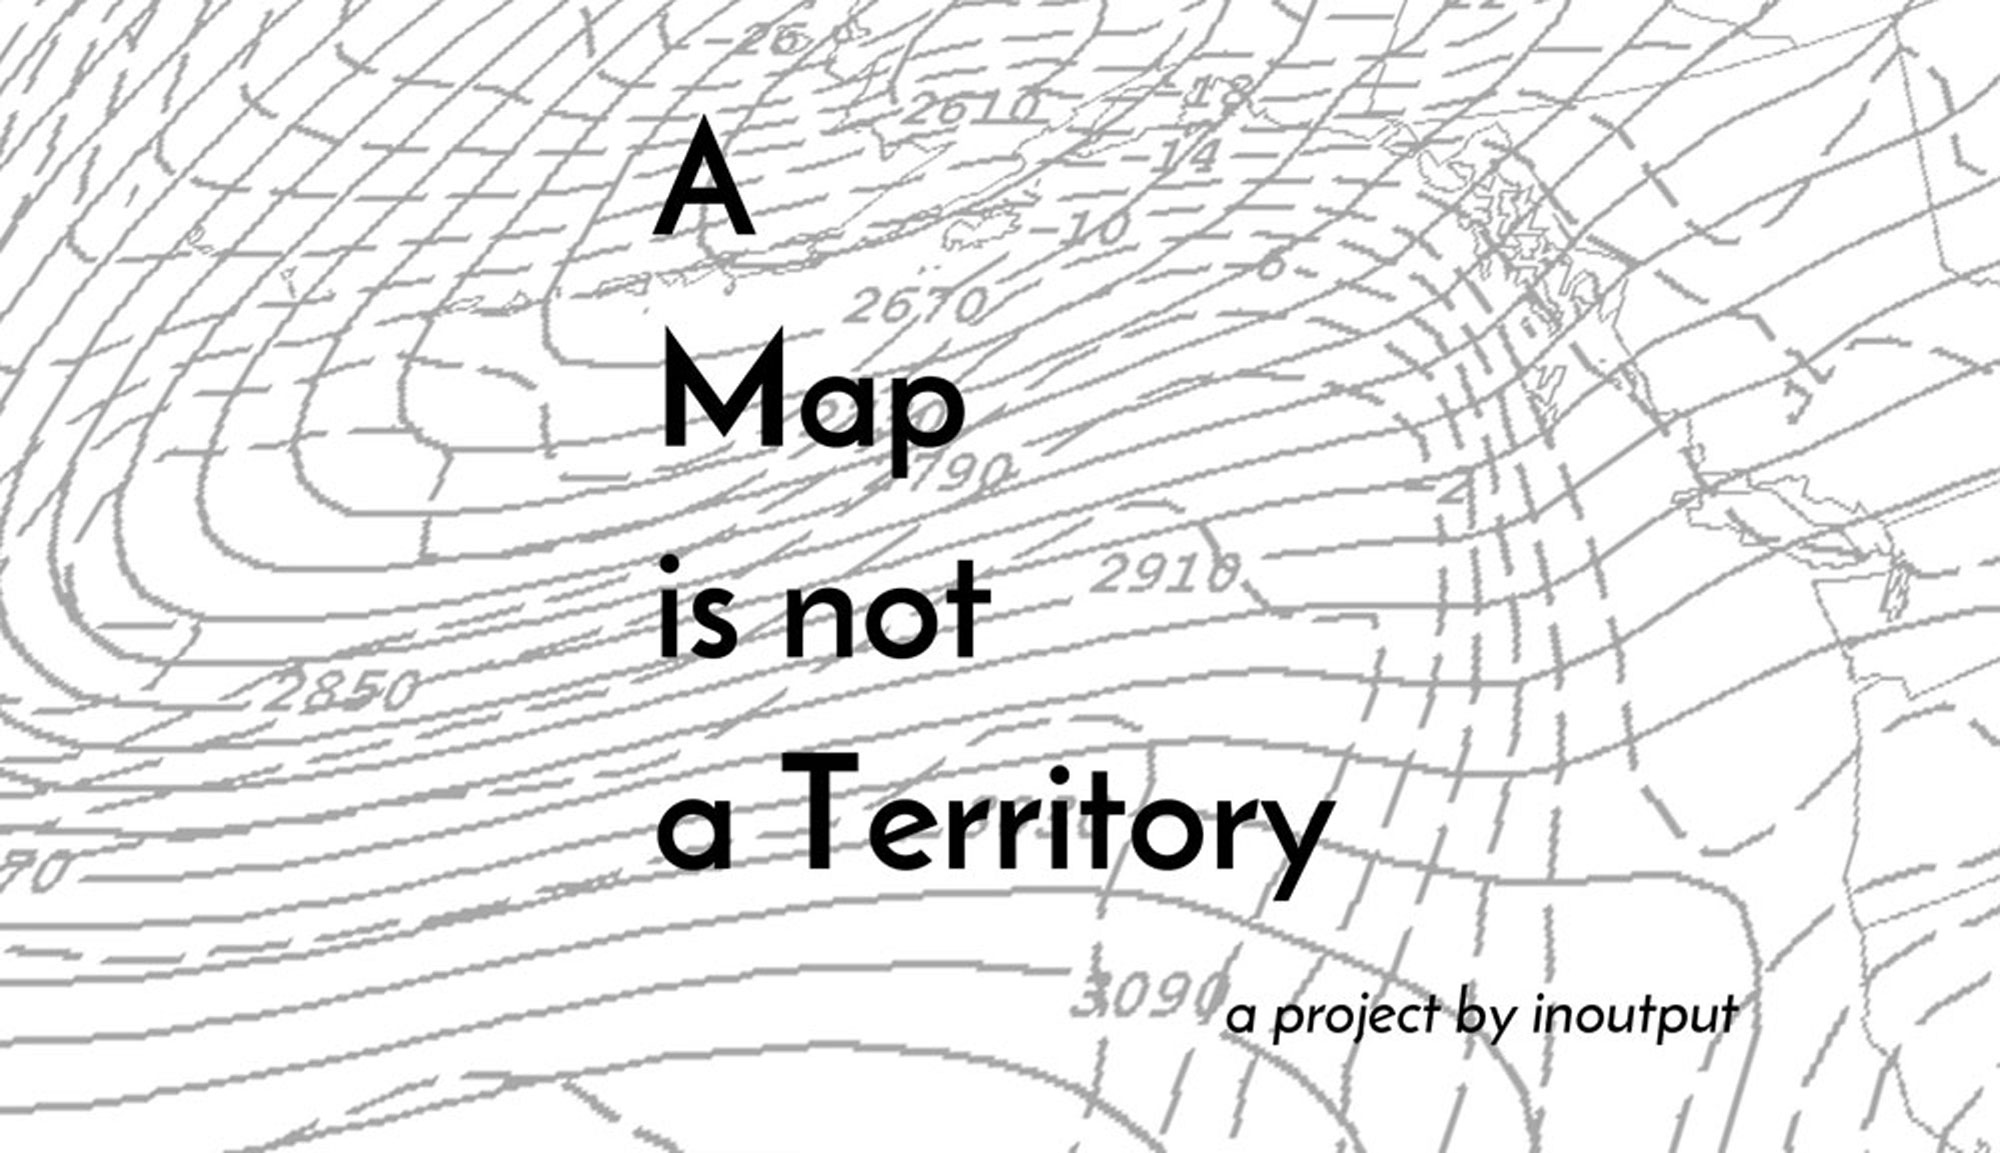 A map is not a territory